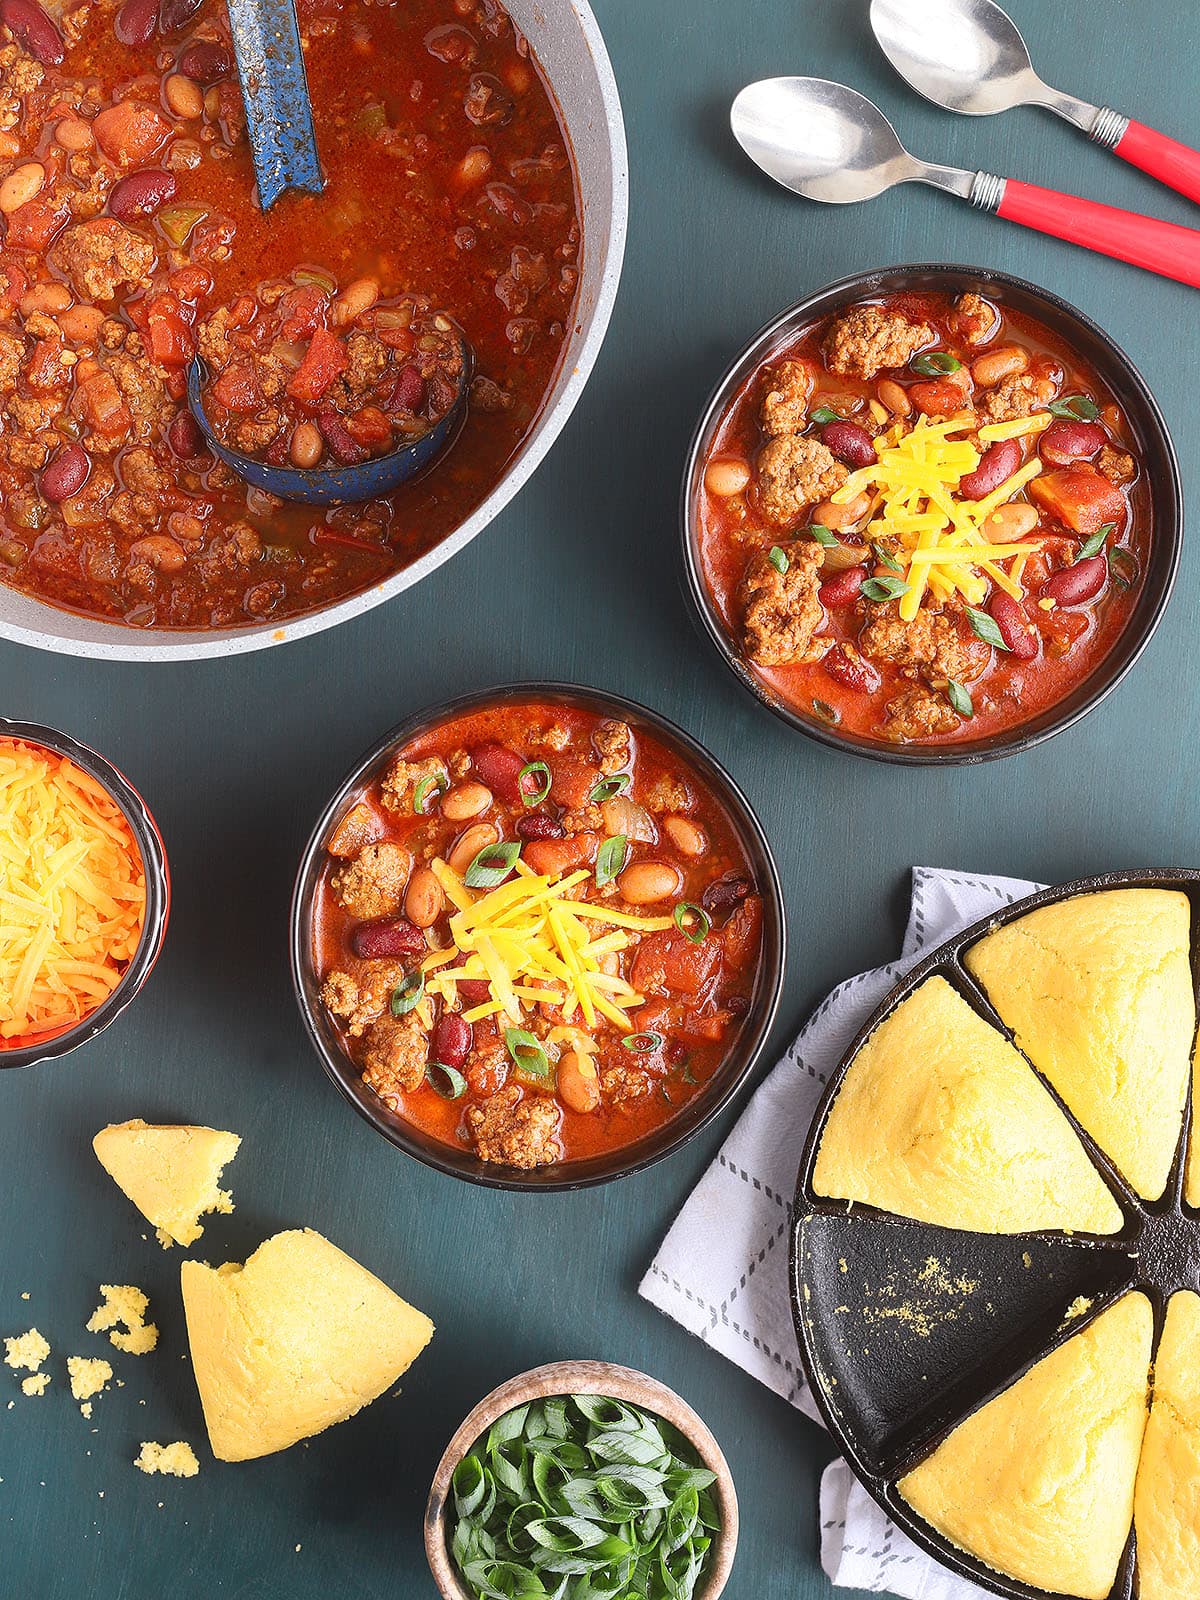 Two bowls of Cowboy Chili topped with shredded cheddar cheese with a pot of chili, cornbread and condiments to the side.